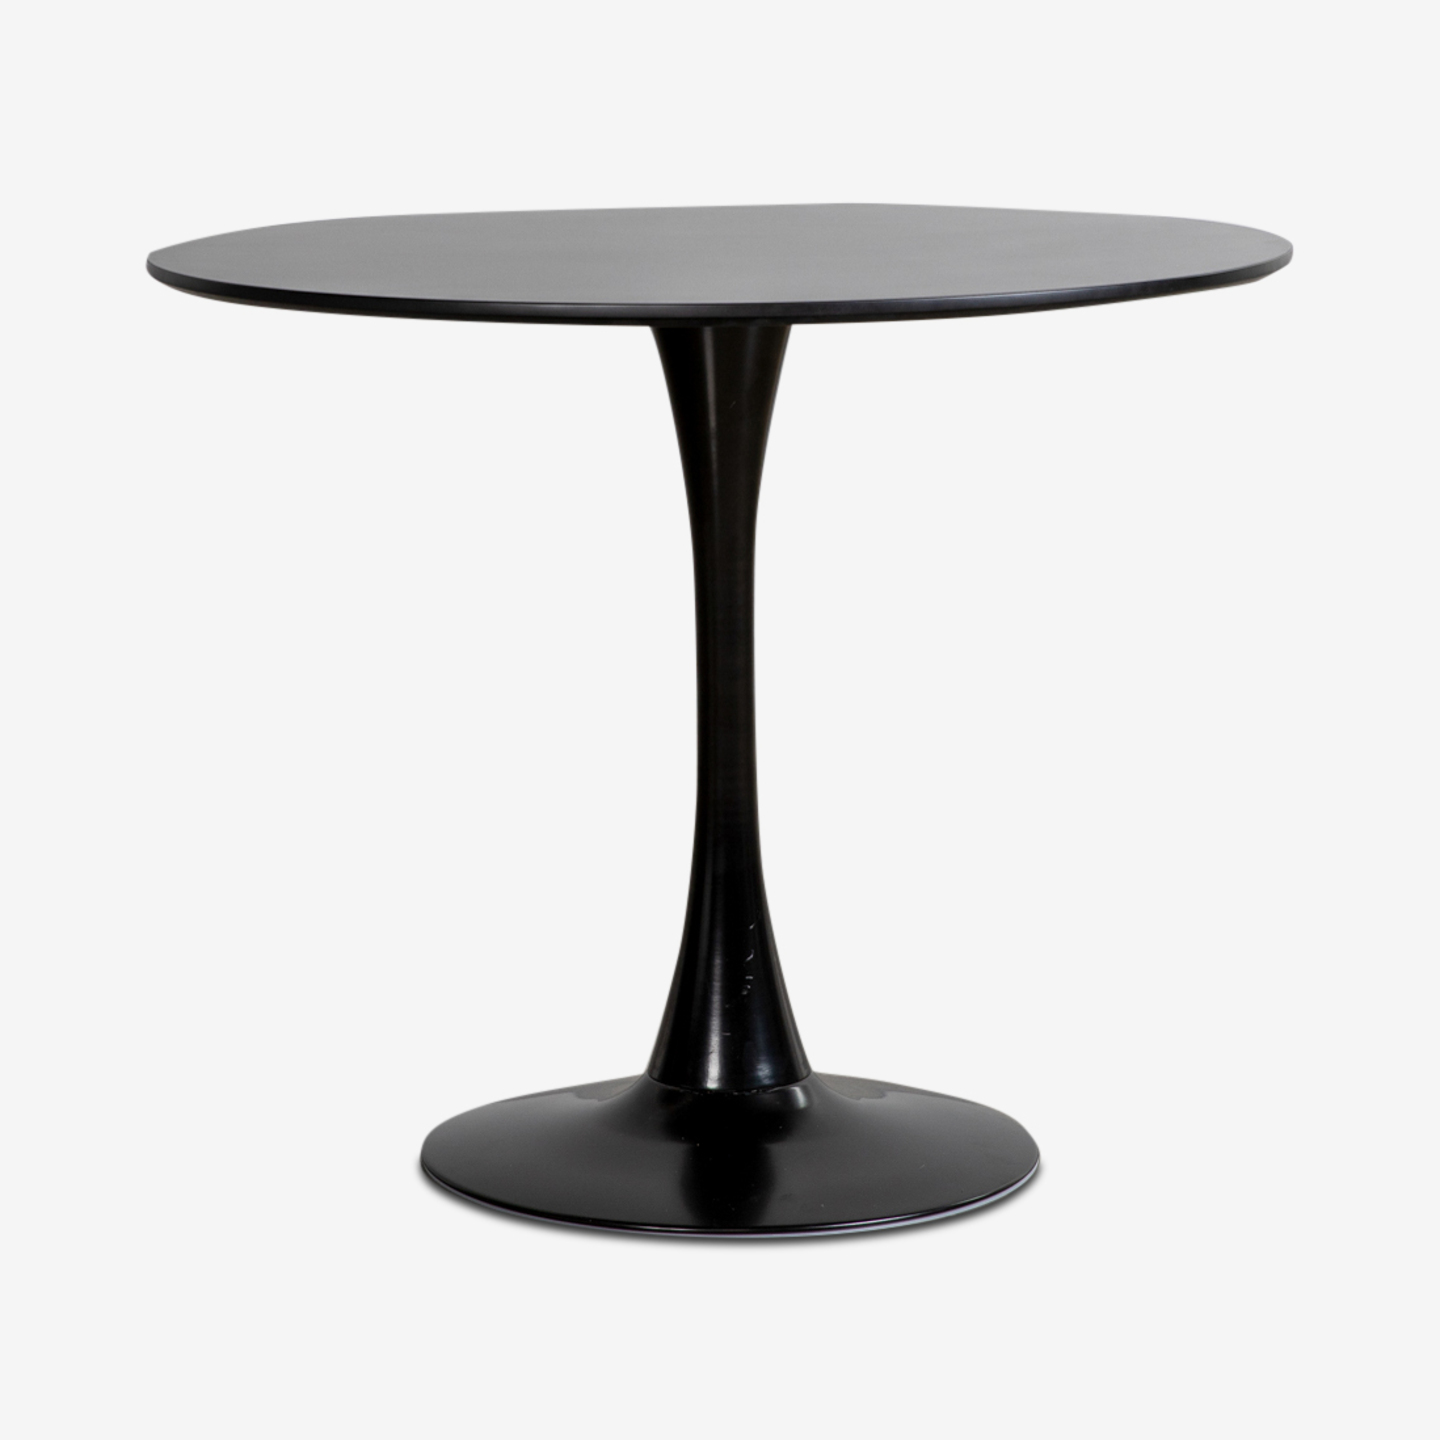 148_Cameron-Round-Dining-Table_Front 2020